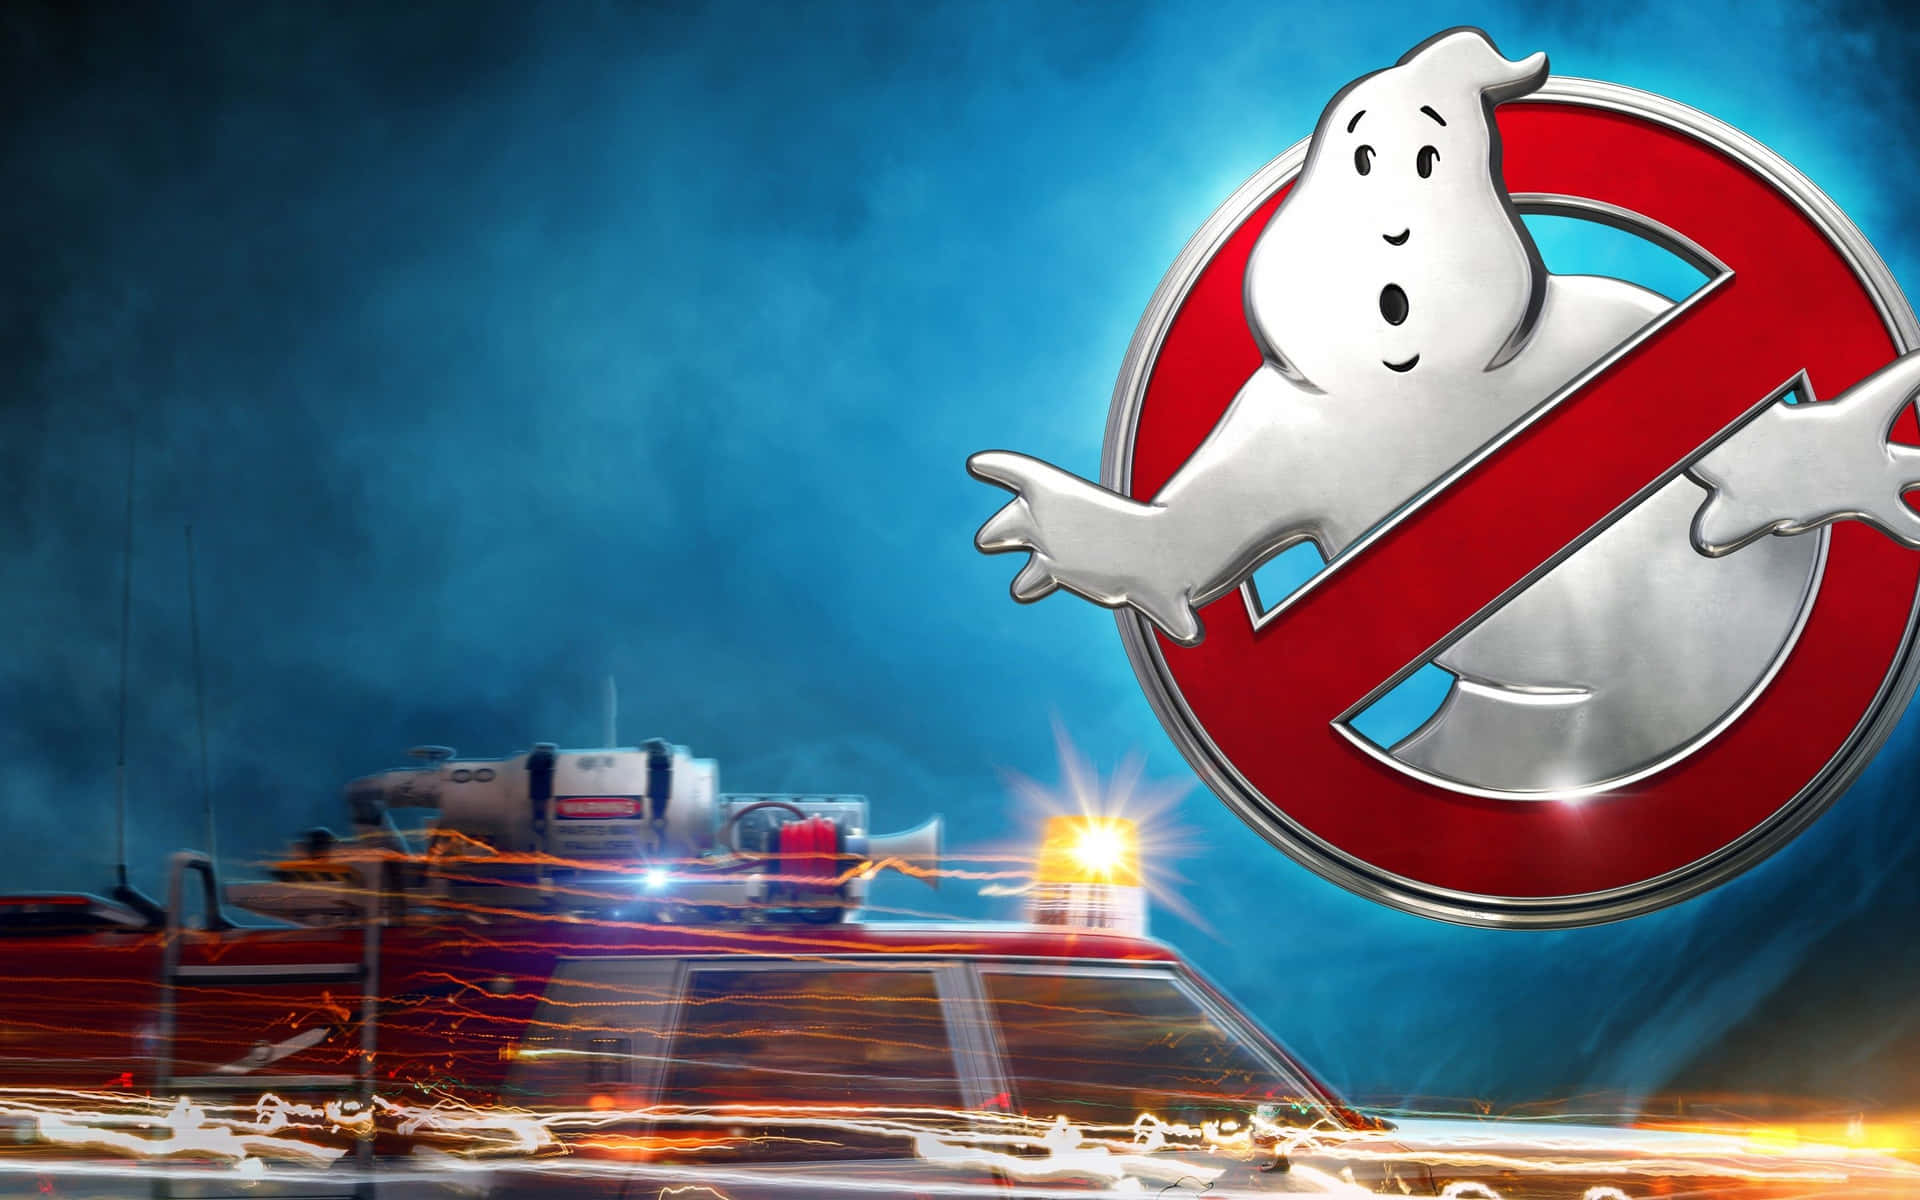 ghostbusters - a ghostbuster logo with a car in the background